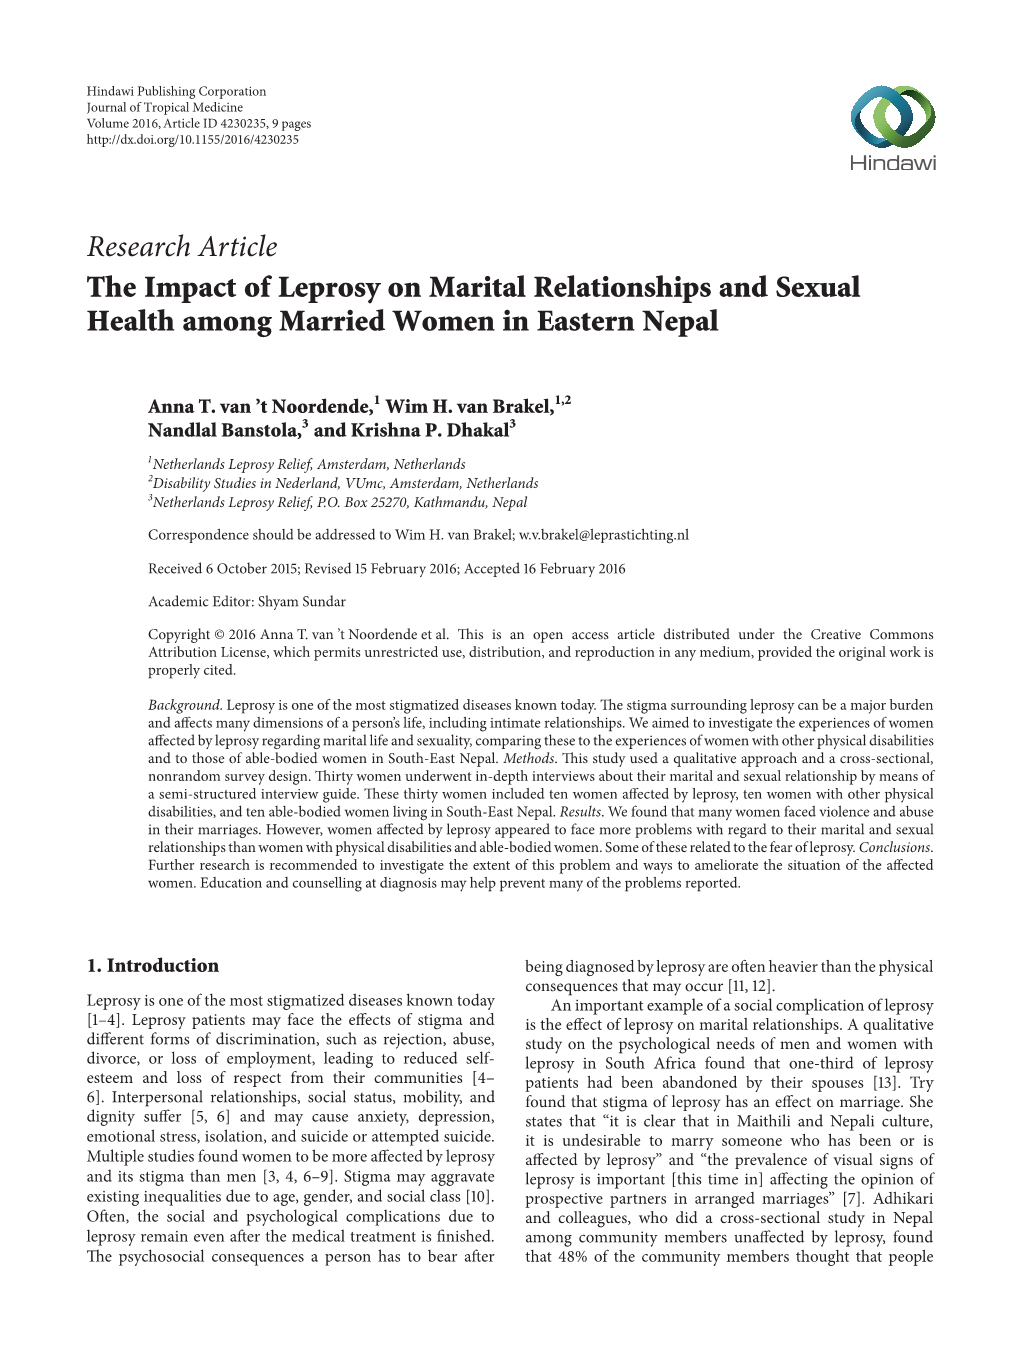 Research Article the Impact of Leprosy on Marital Relationships and Sexual Health Among Married Women in Eastern Nepal